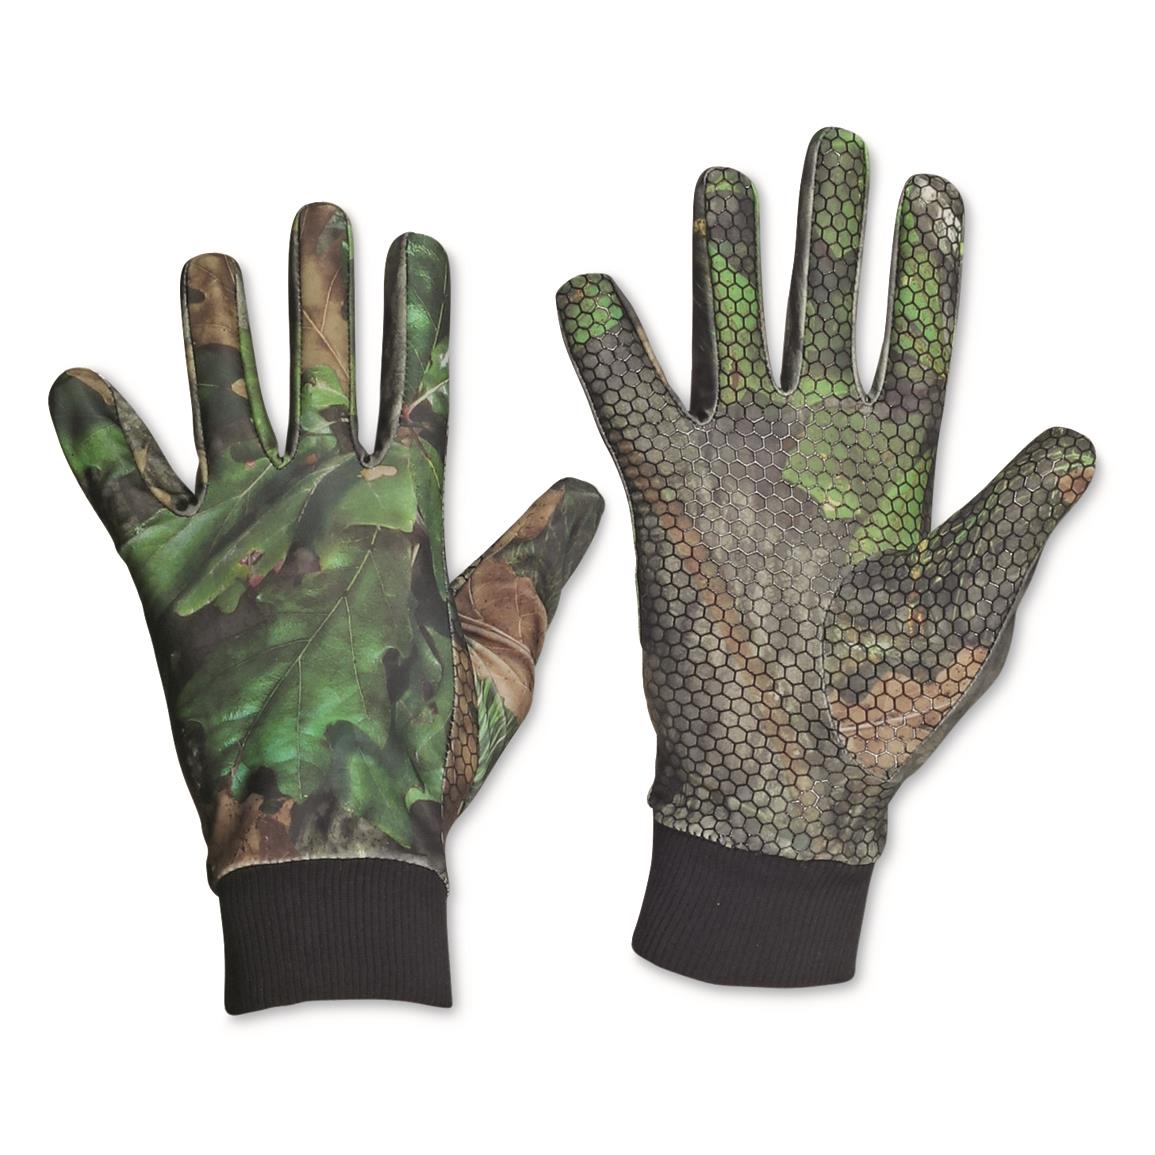 Gamehide Men's Elimitick Camo Insect-Repellent Gloves, Obsession